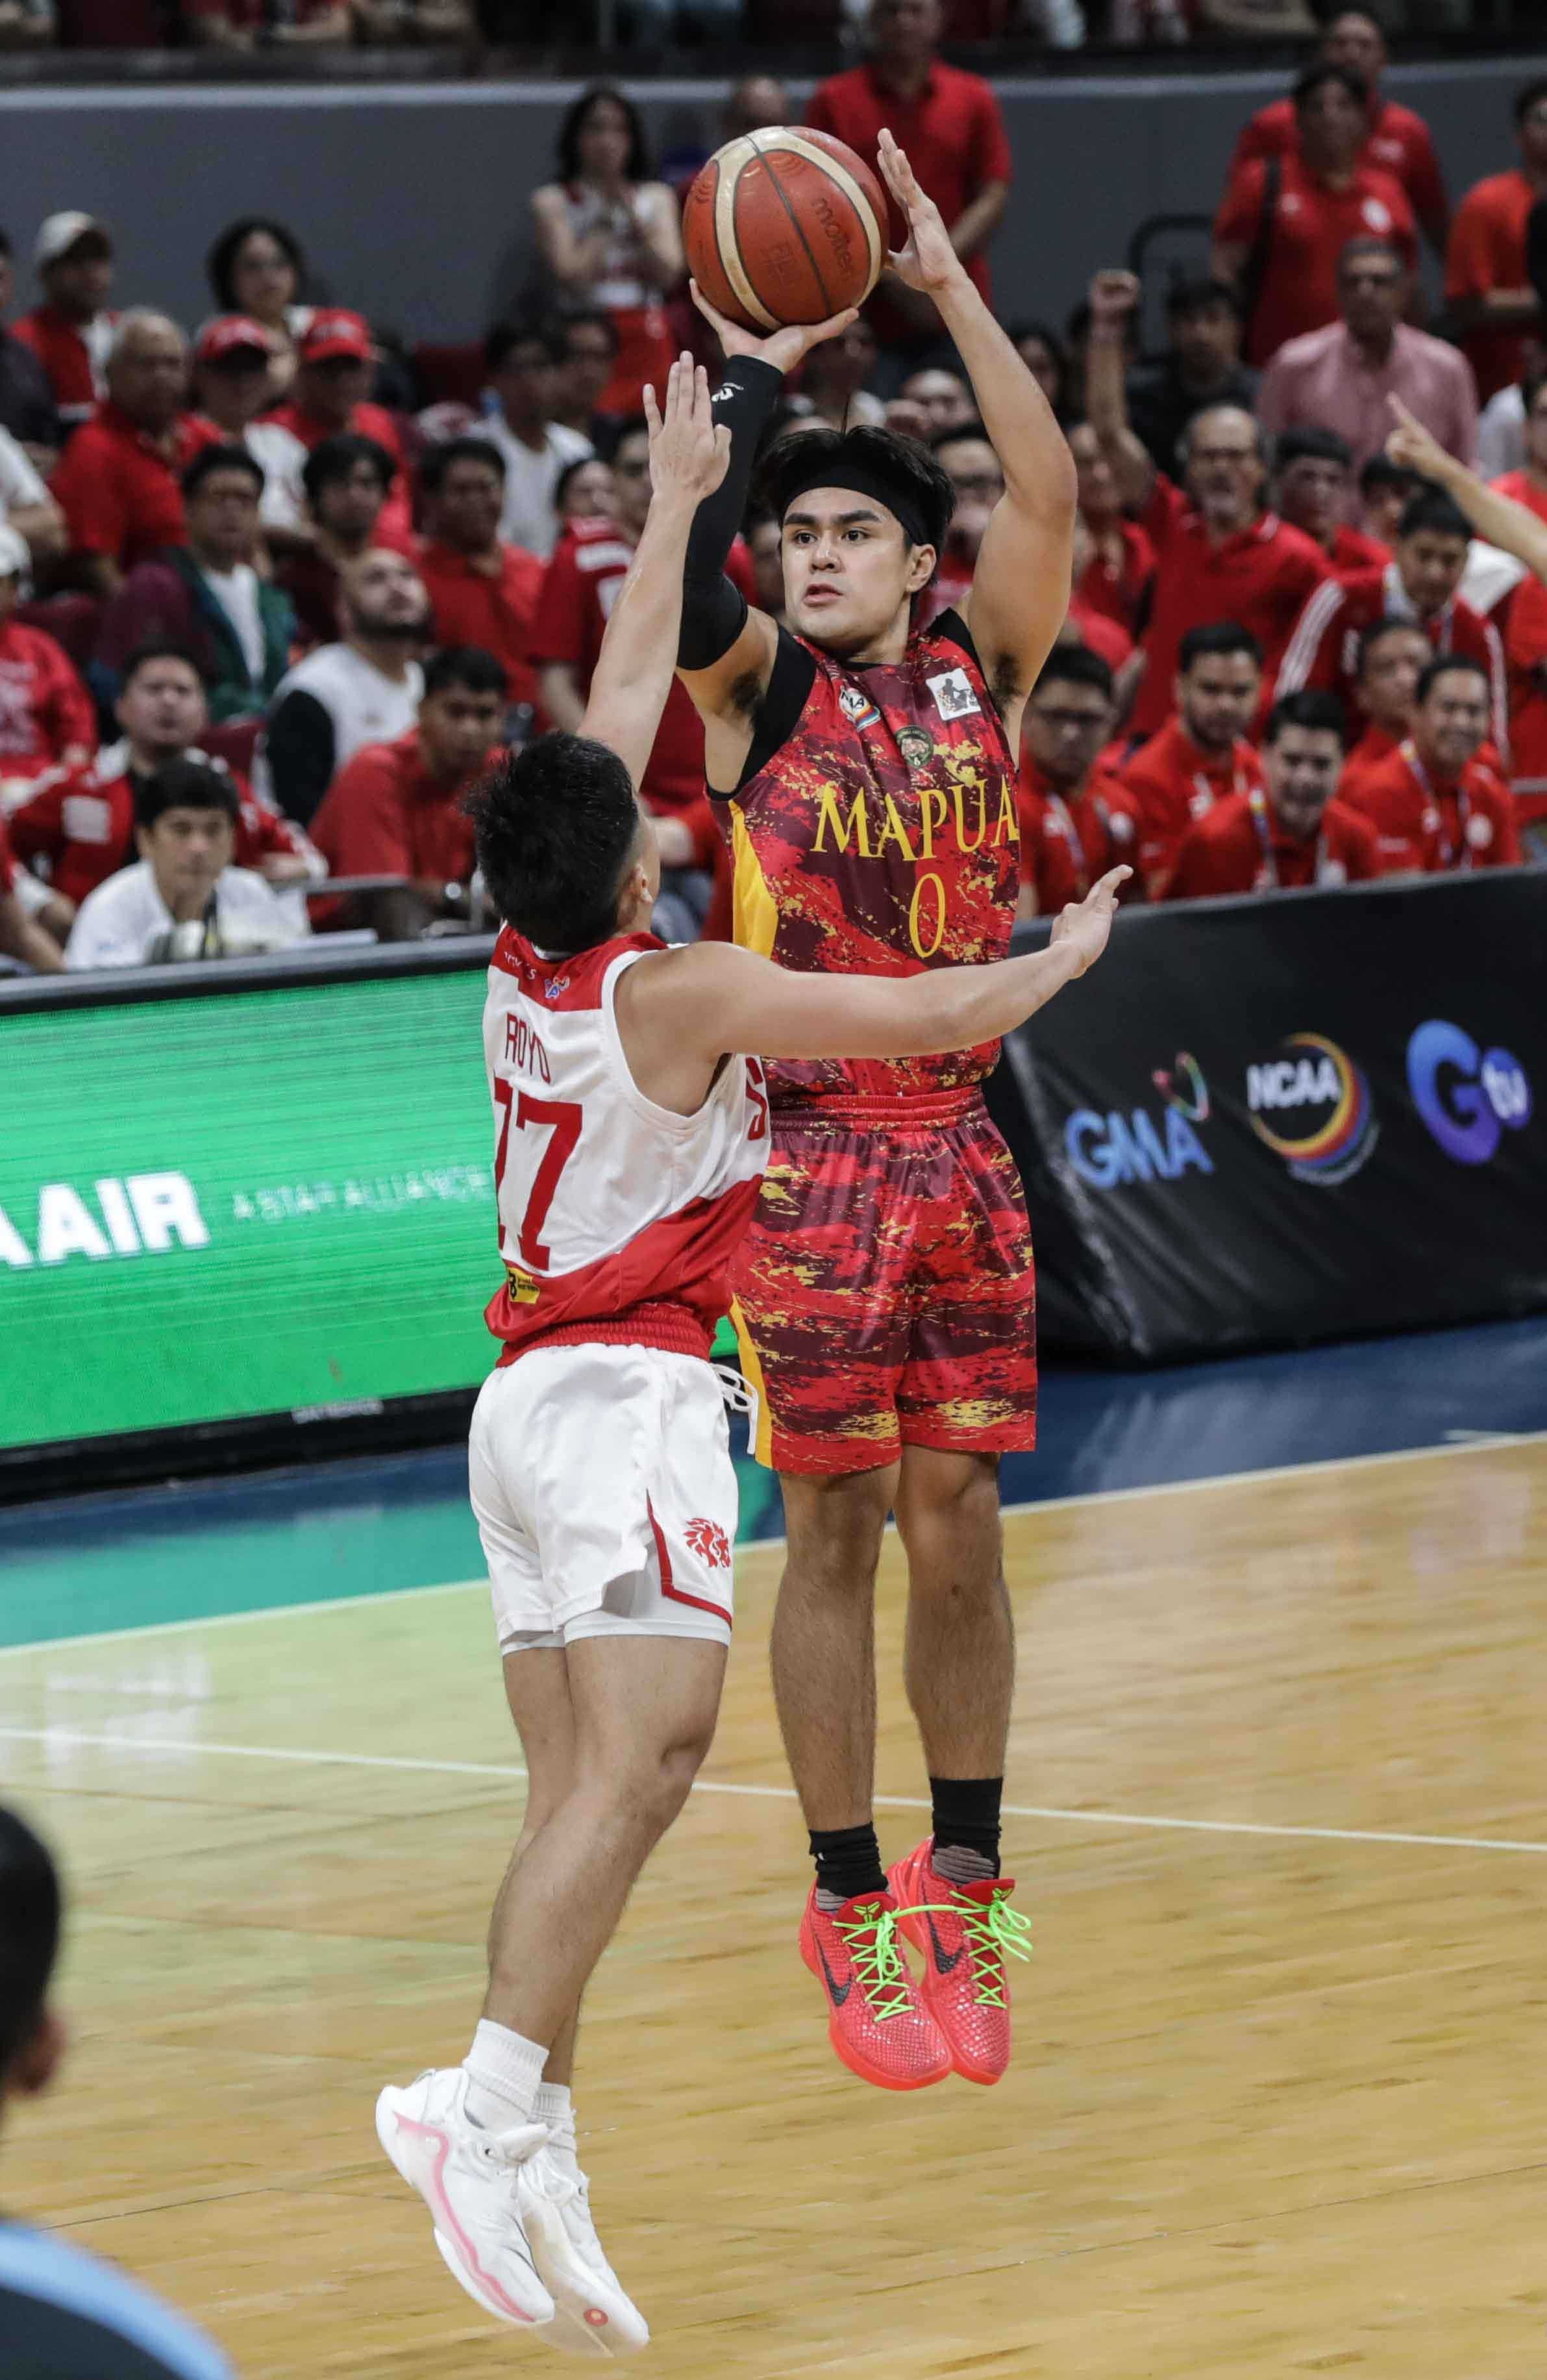 Escamis, Cardinals brace for â��all-out warâ�� in Game 3 vs Lions